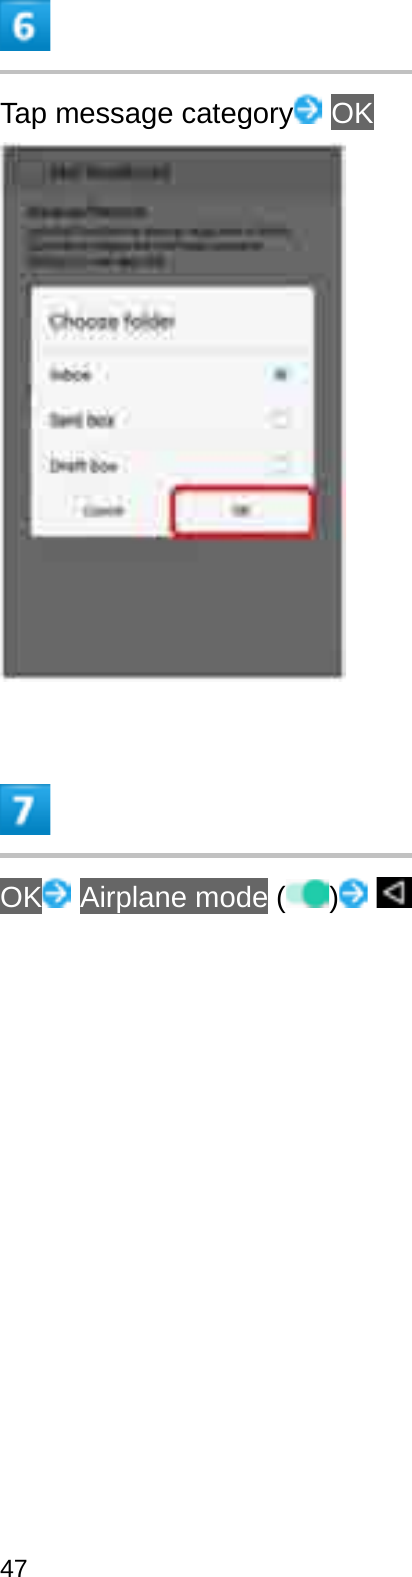 Tap message category OKOK Airplane mode ( )47